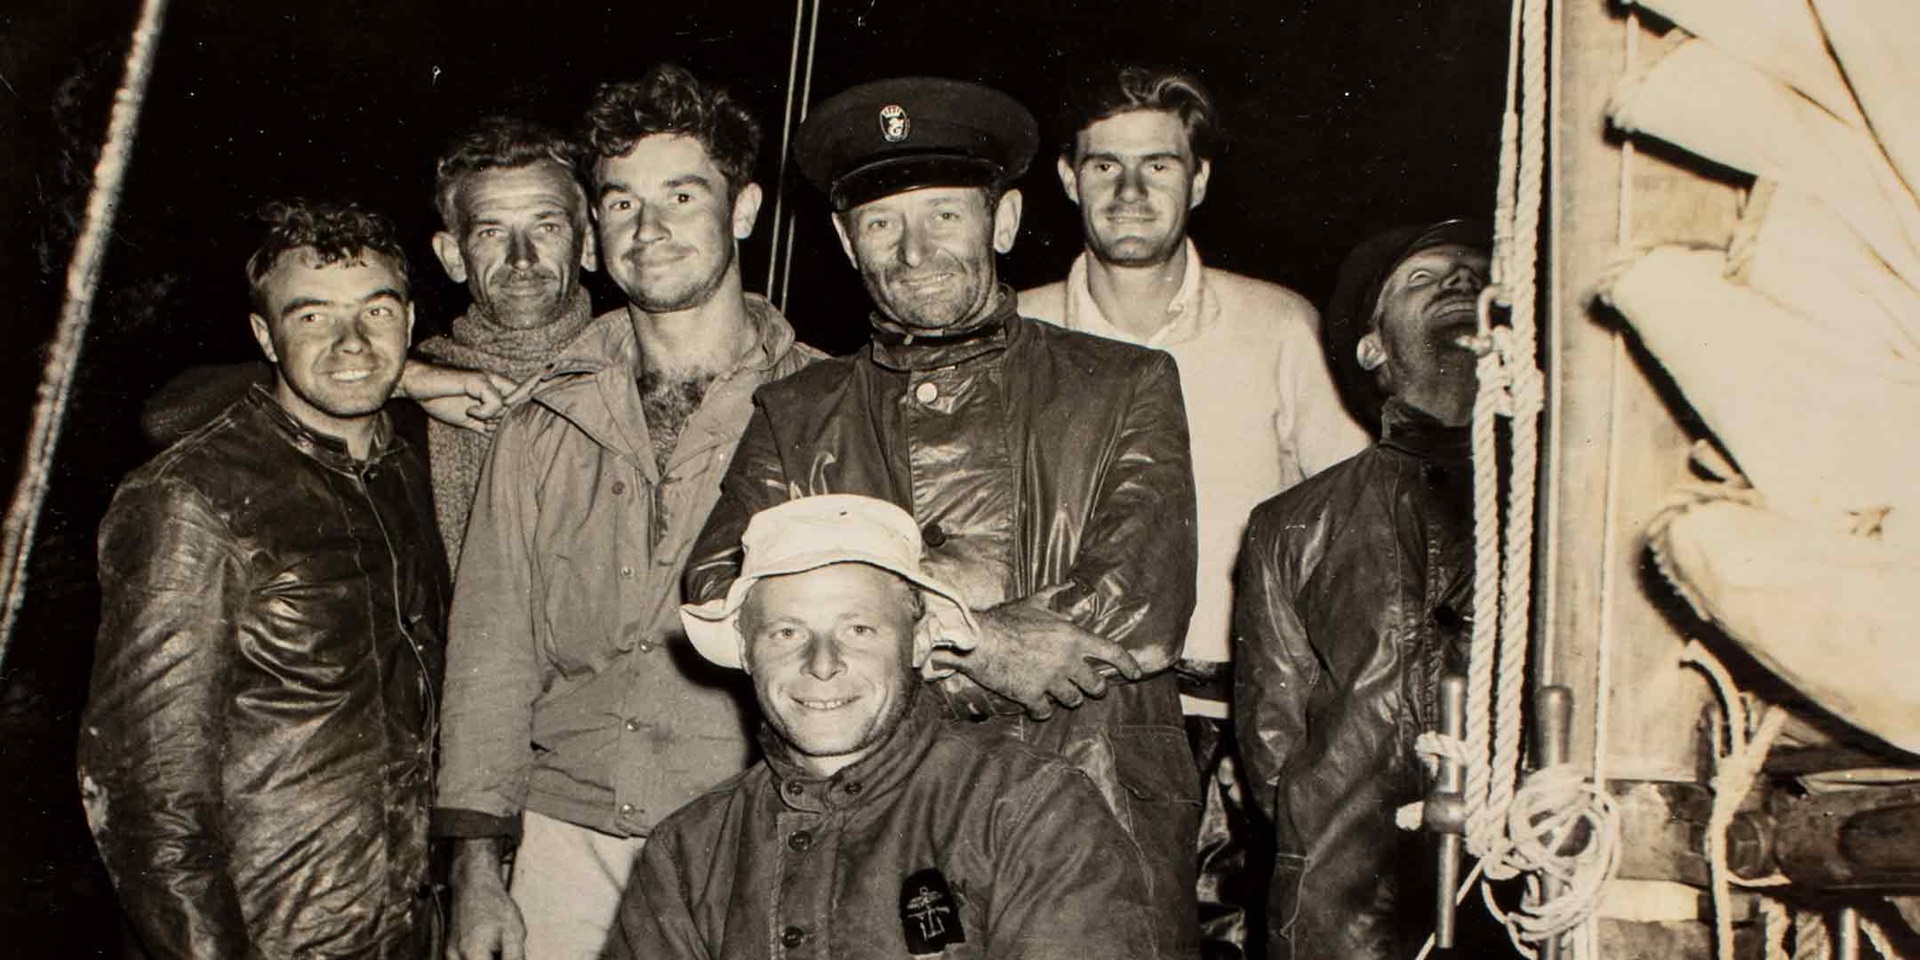 Skipper Captain John Illingworth (centre standing in cap) with the crew of Rani, the winner of the first Sydney to Hobart Yacht Race, 1.45am, 2 January 1946. ANMM Collection 00048228_003, Gift from Alison Richmond